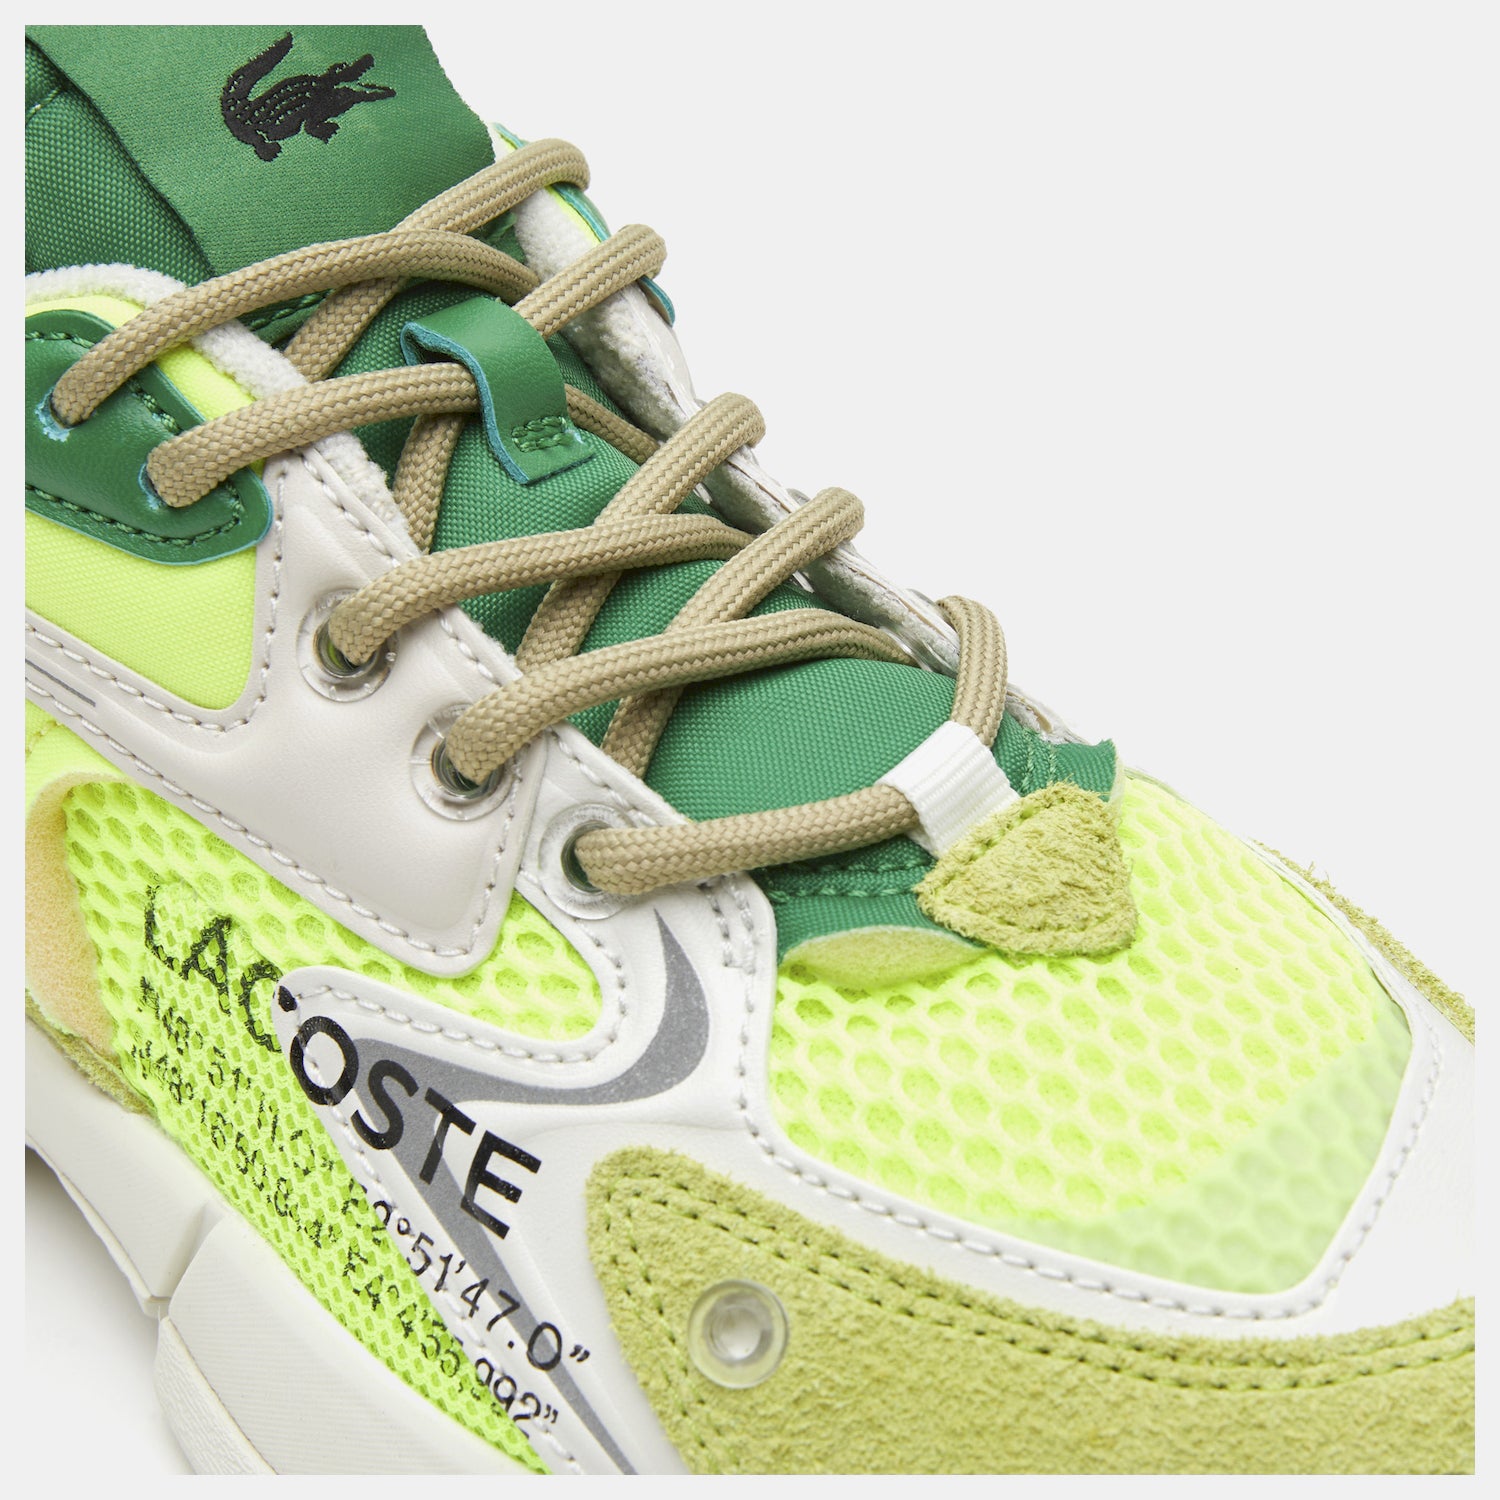 Lacoste Sapatilhas Sneakers Shoes L003 Yellow Whi Amarelo Branco_shot6